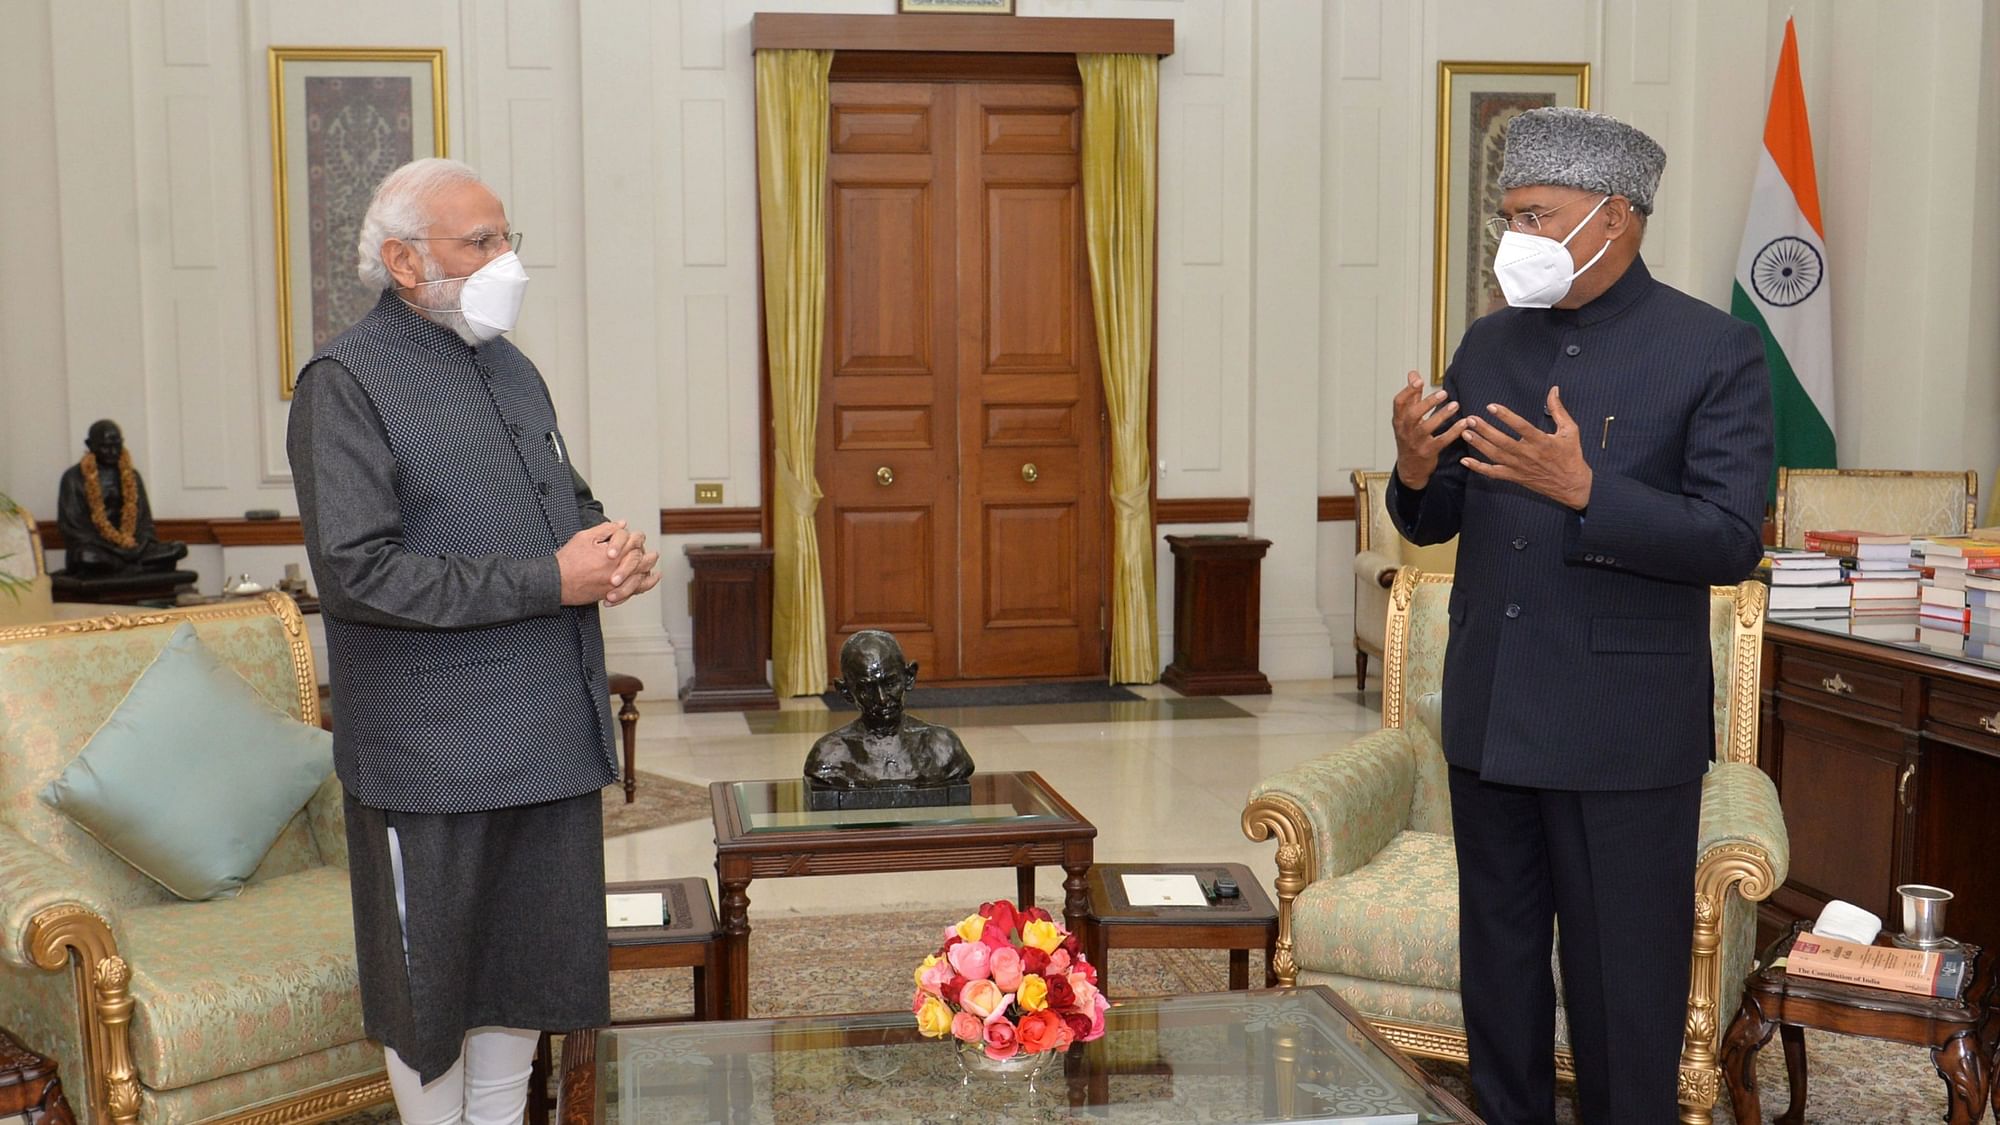 <div class="paragraphs"><p>A day after a "major lapse" in his security in Punjab, PM Modi on Thursday, 6 January, met President Ram Nath Kovind and gave him a "first-hand account of the security breach in his convoy".</p></div>